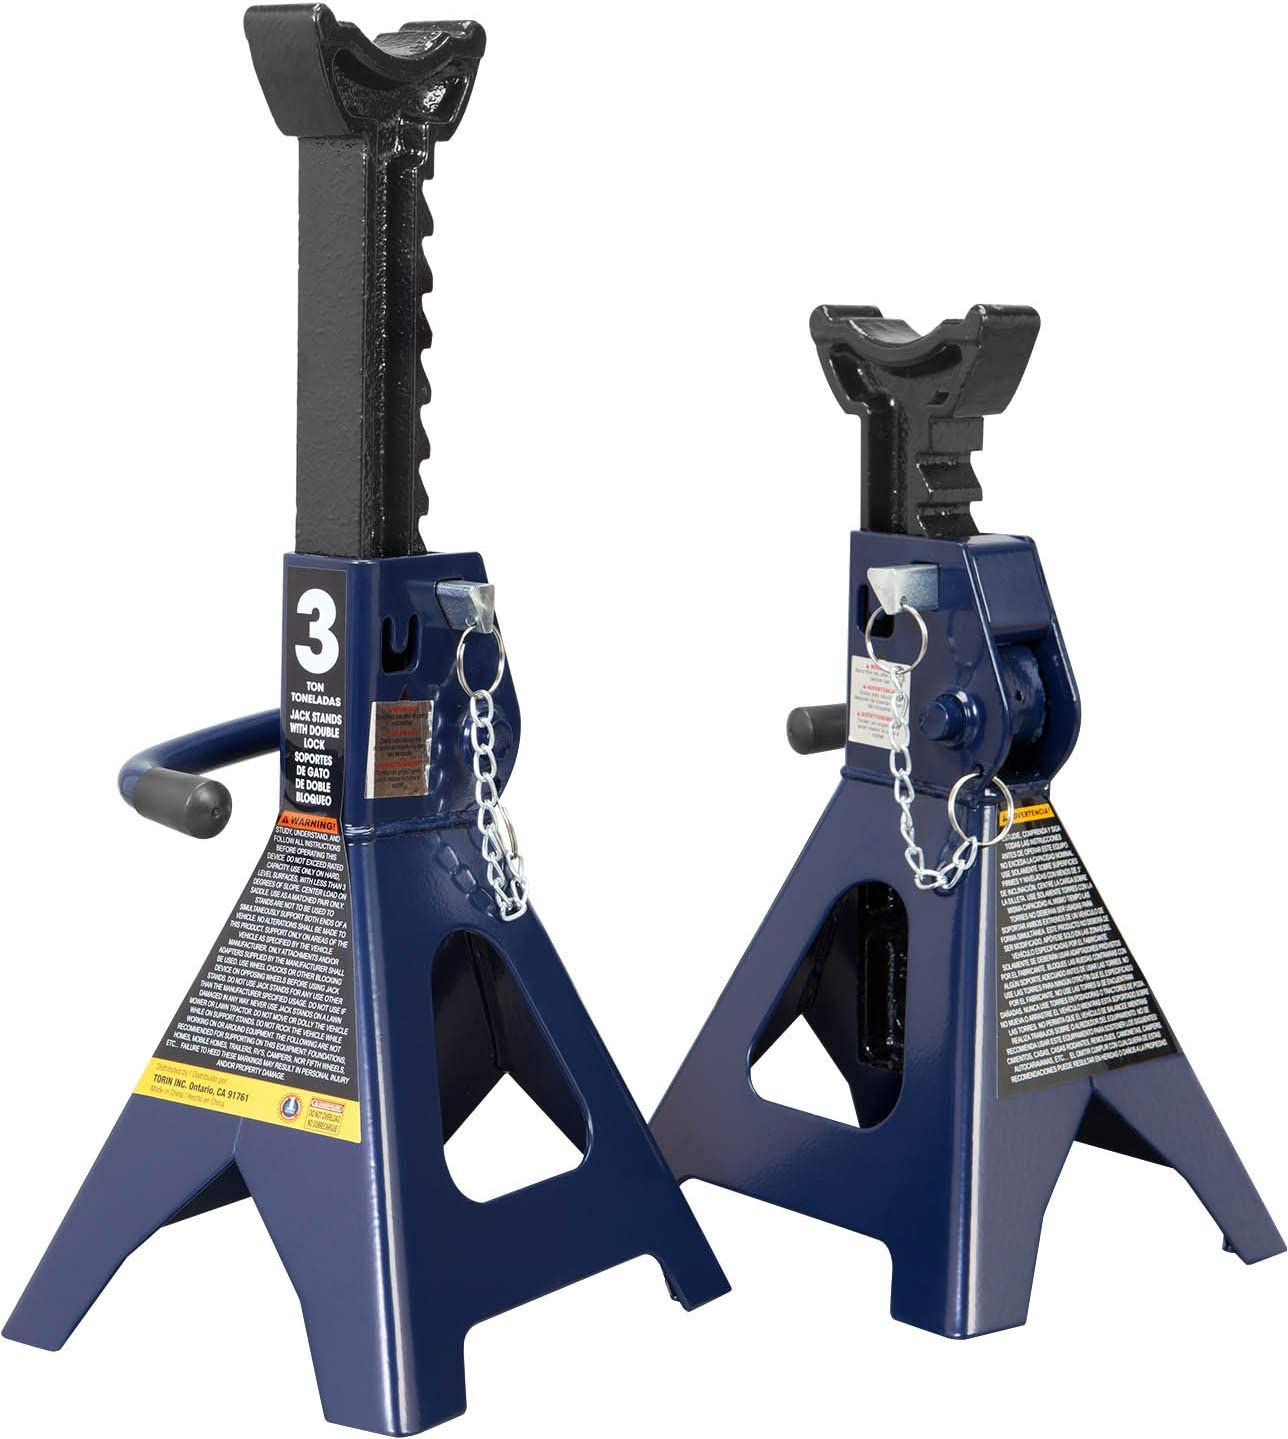 TORIN - 3 Ton Double Locking Jack Stands